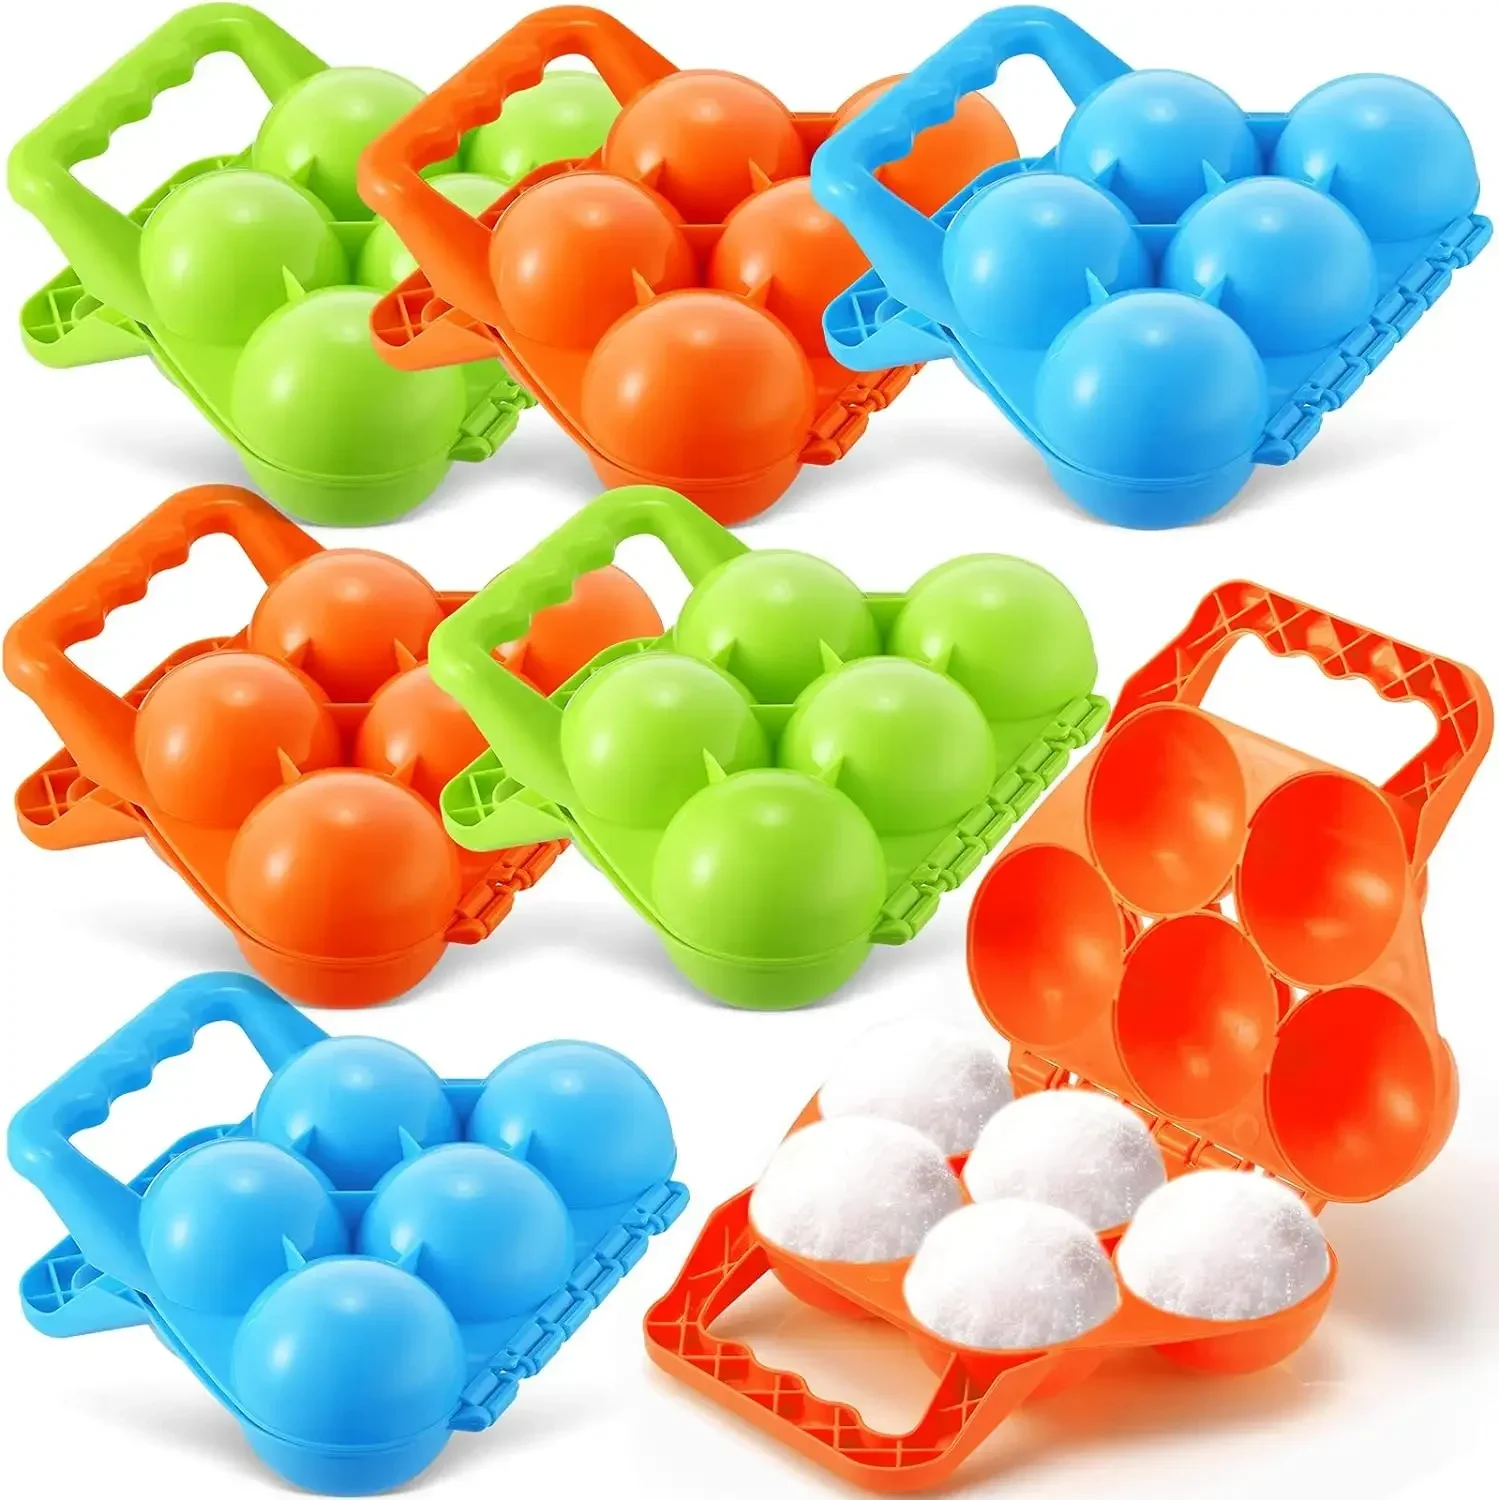 N outdoor plastic winter snow sand mould tool for children snowball fight outdoor funny thumb200